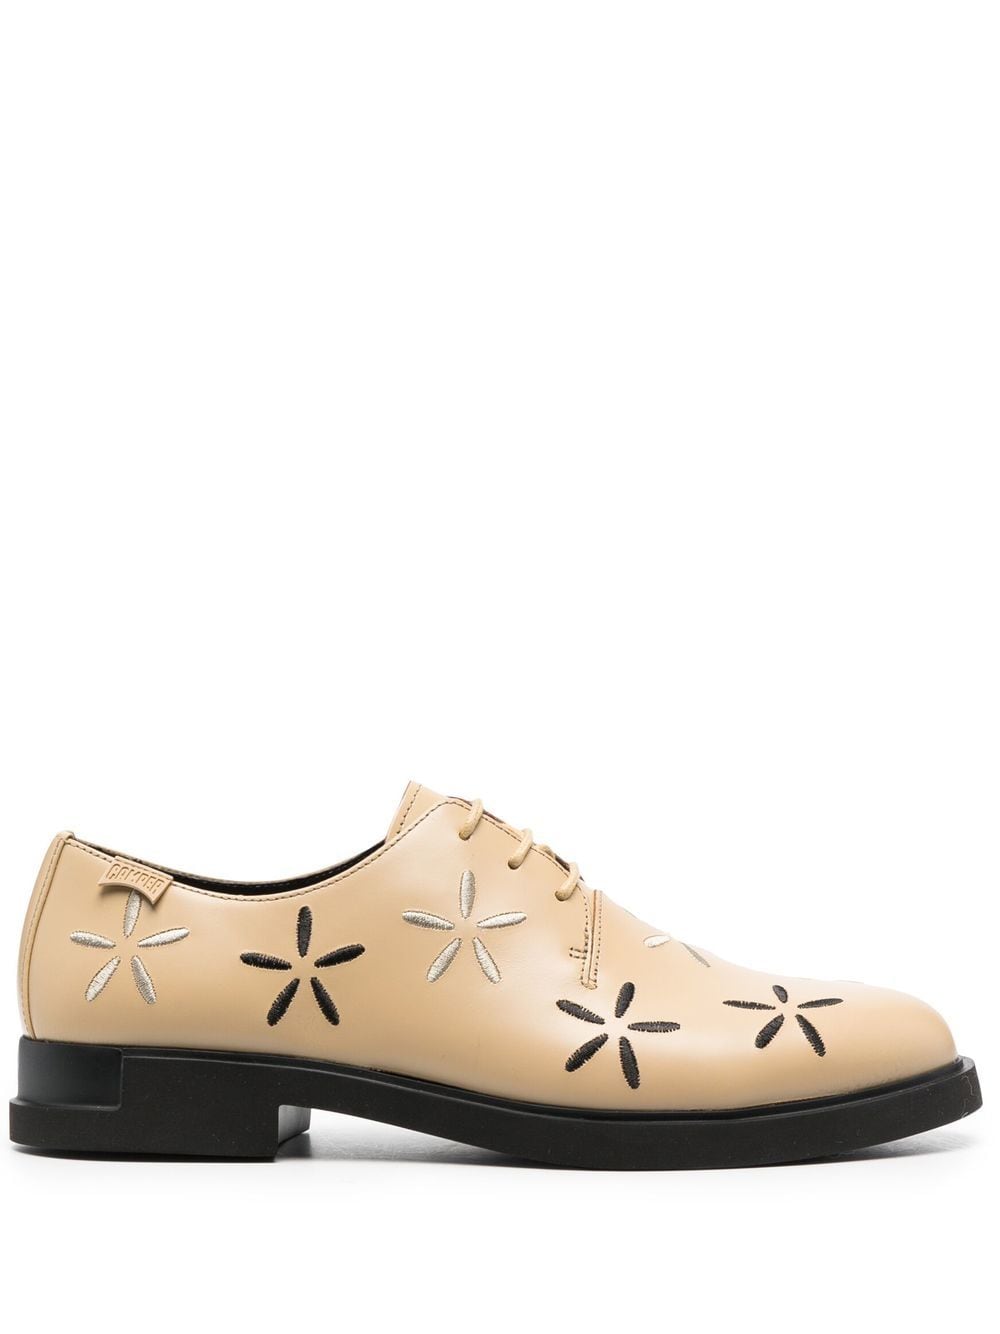 Camper Iman Twins Beige Leather Lace-up Shoes For Women In Brown